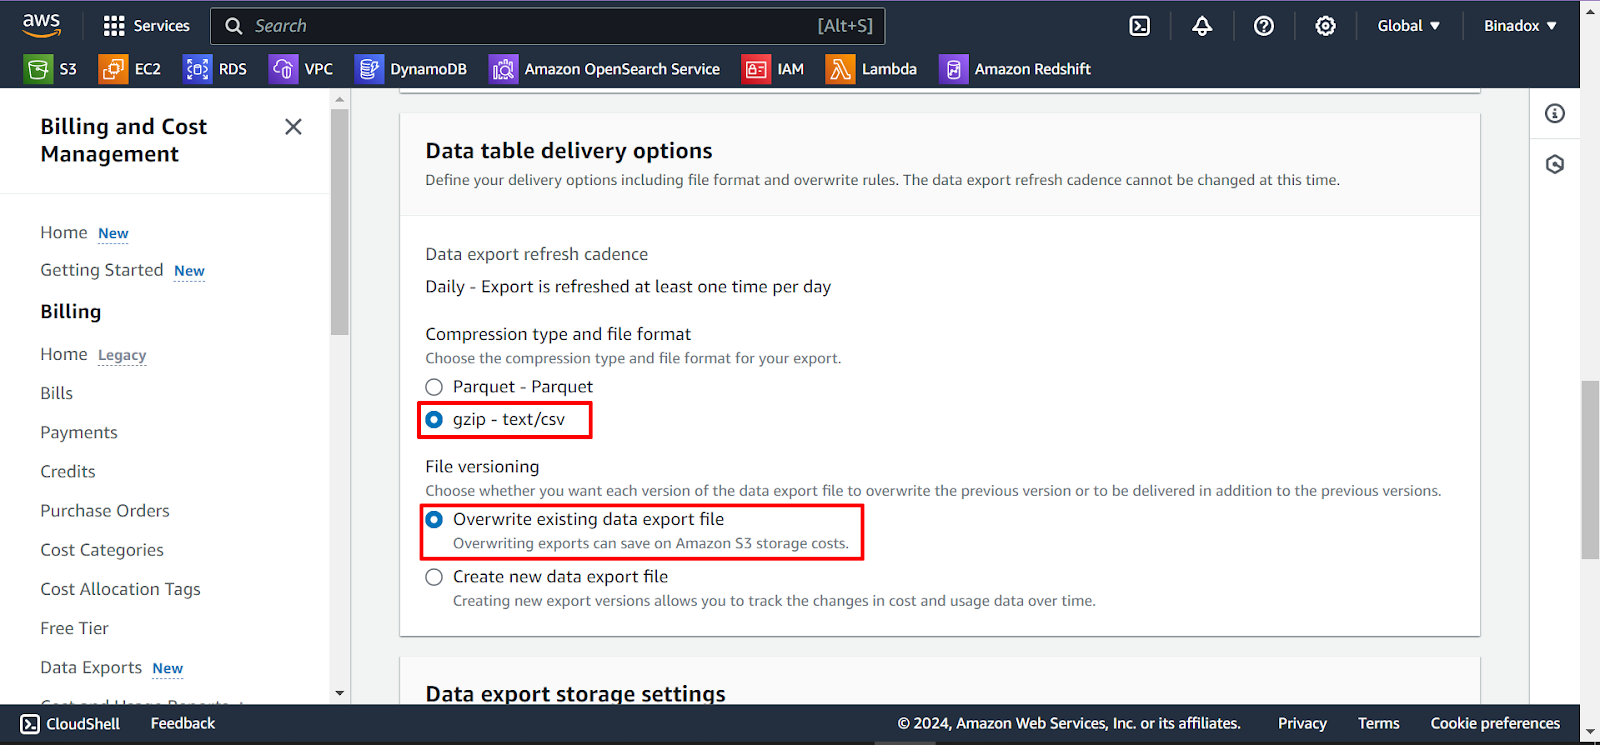 Data table delivery options